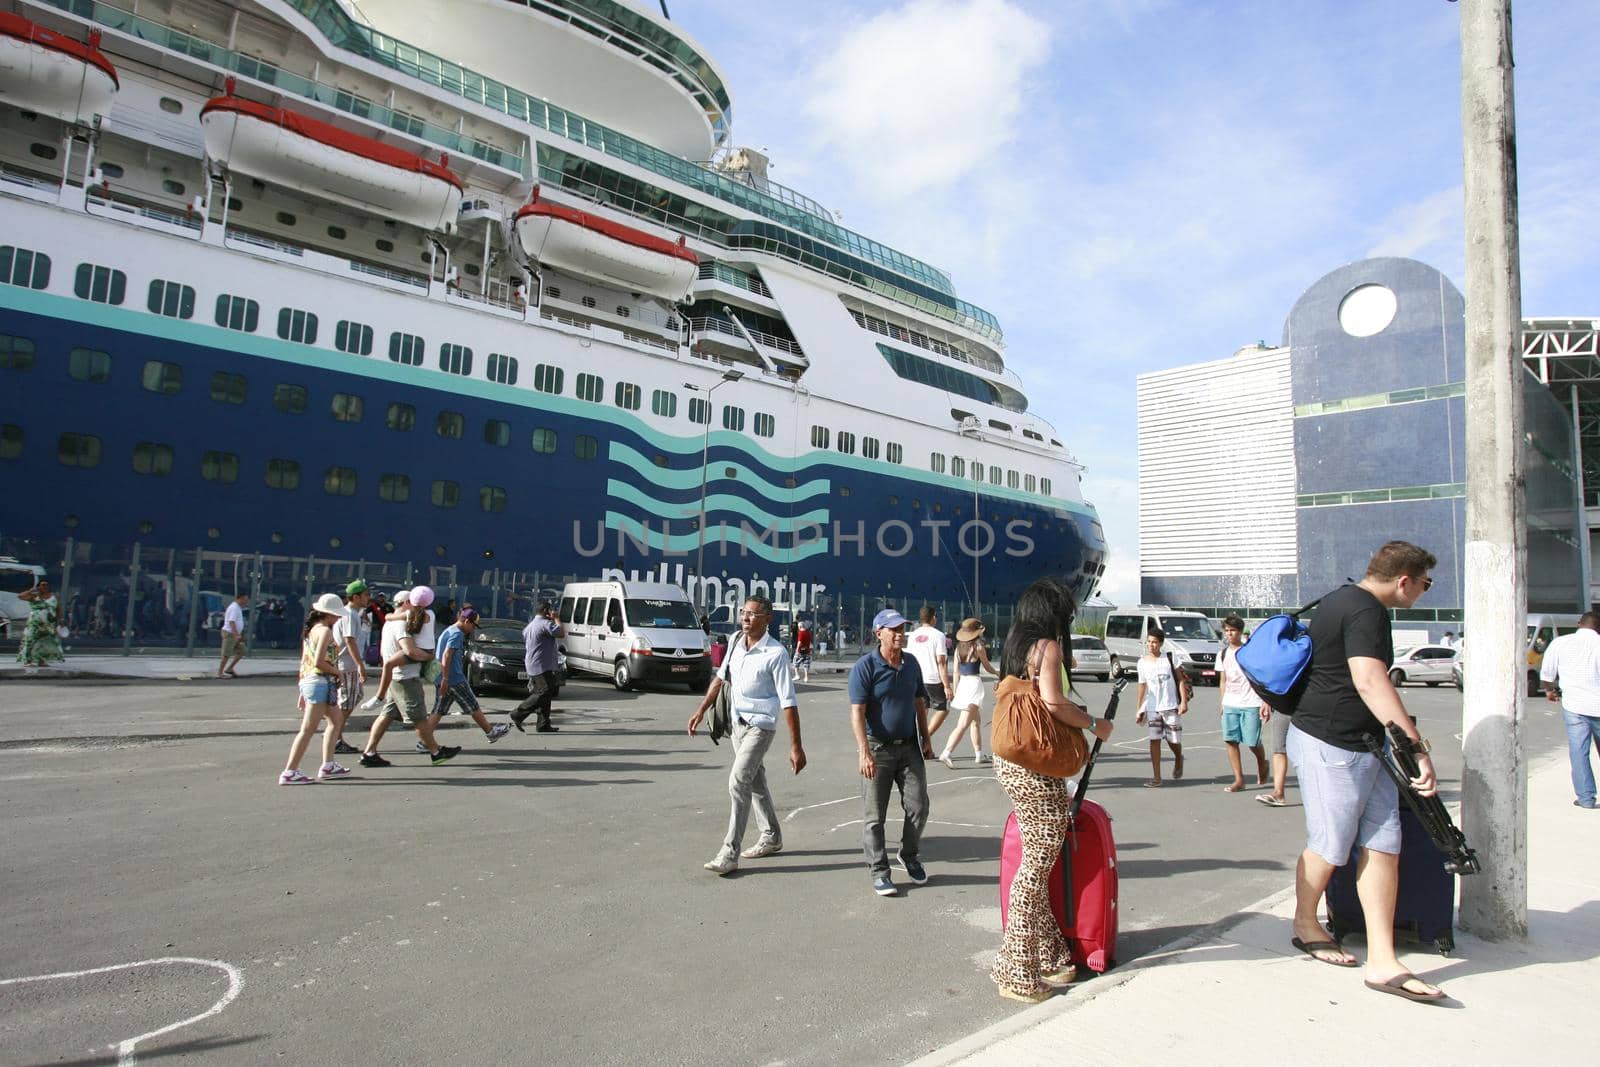 salvador, bahia, brazil - december 23, 2014: passengers during disembarkation from a transatlantic ship at the Maritime Terminal of Porto in the city of Salvador.